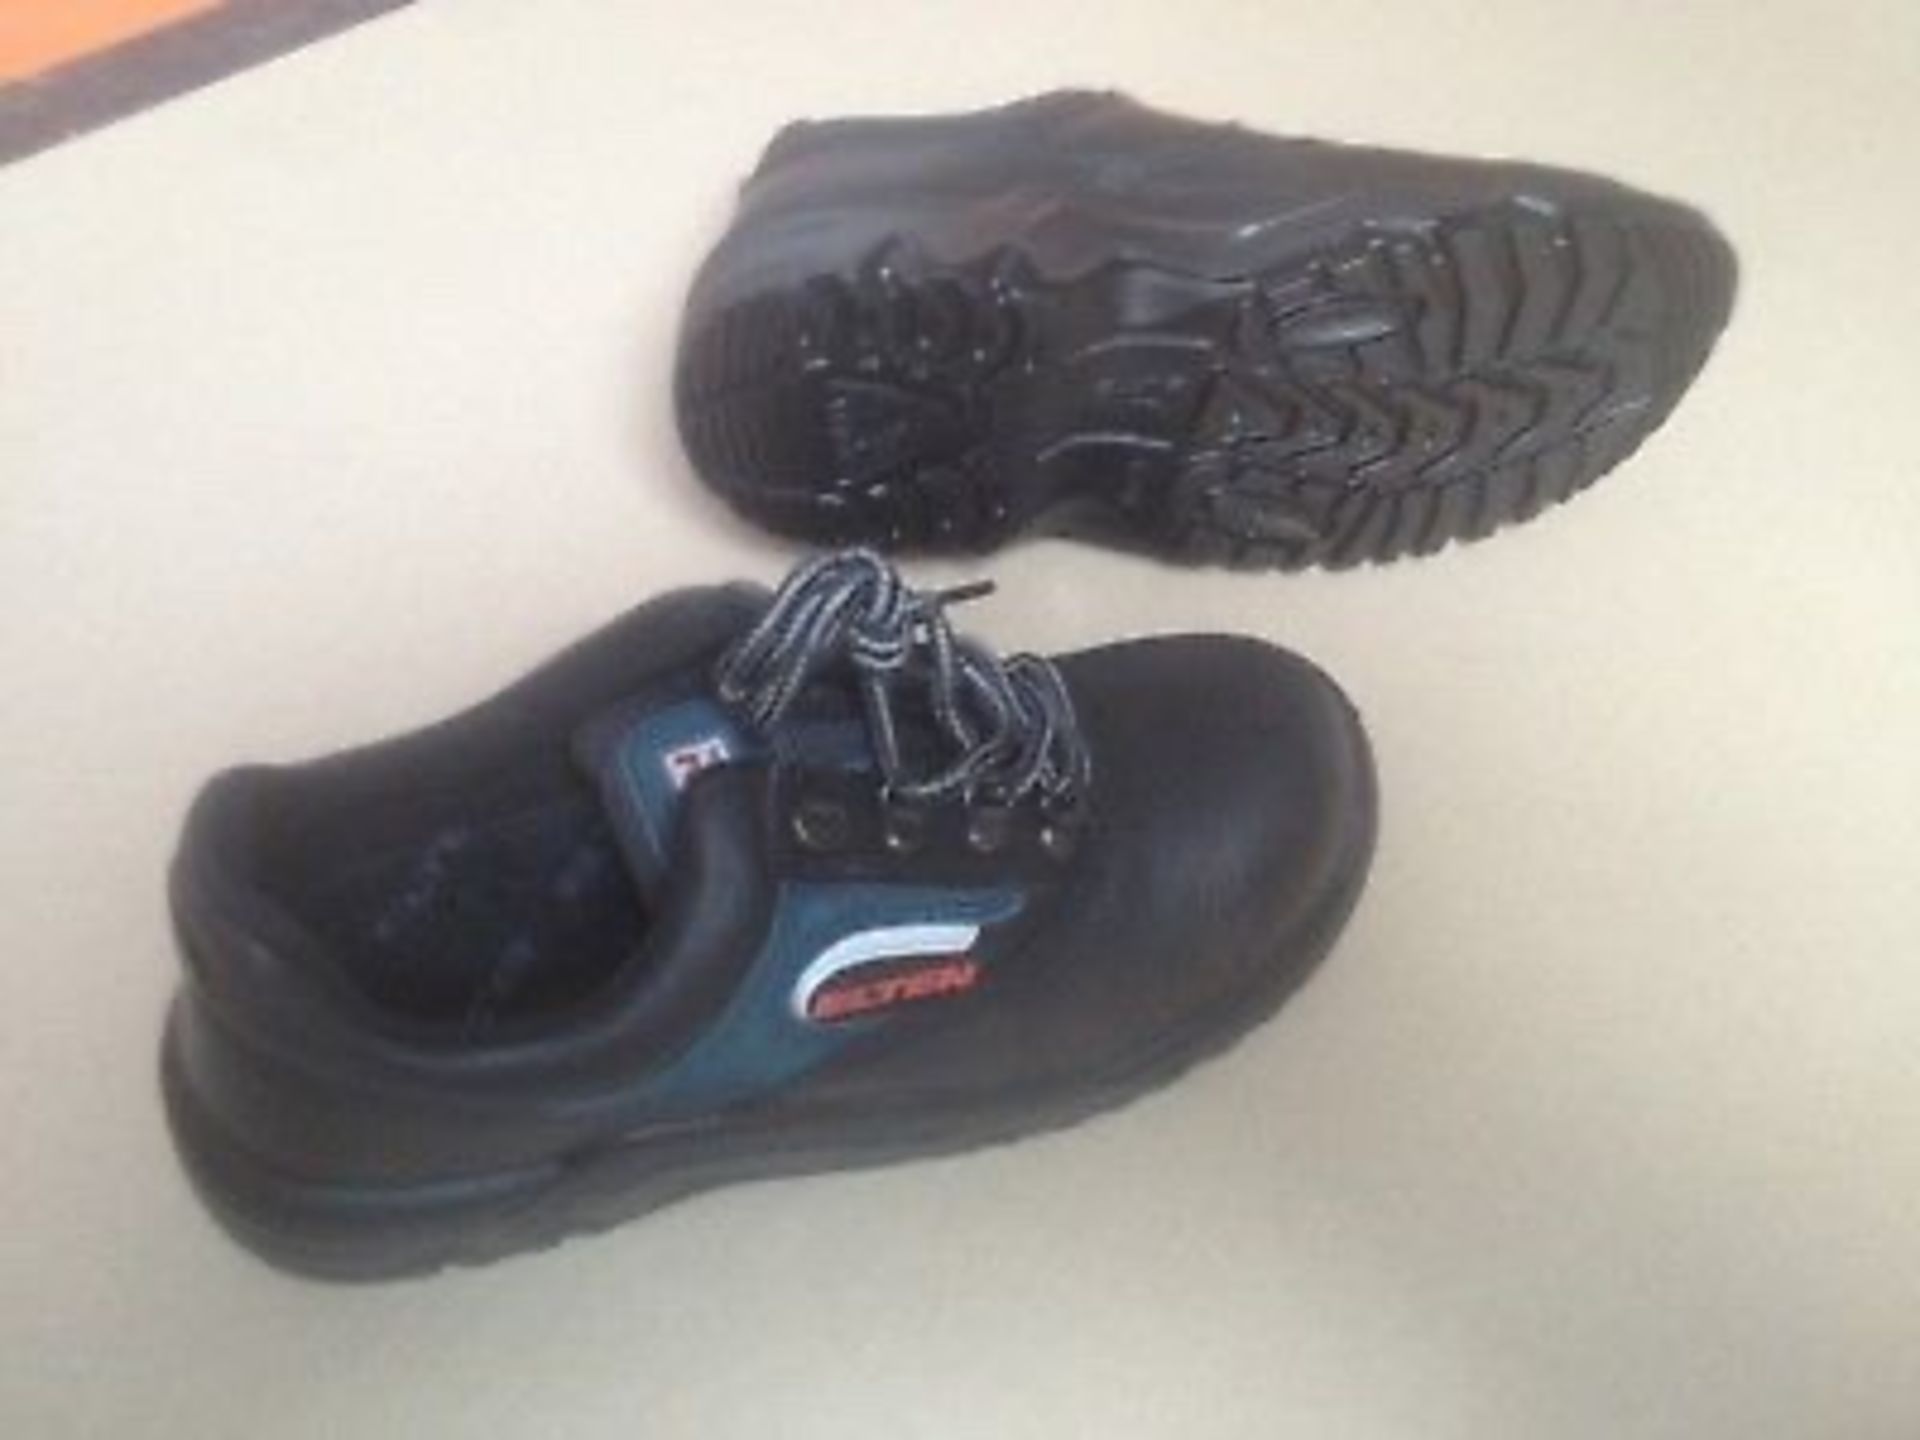 1 Pair of Safety Shoes. Elten 2478. Toe Protector. UK Size 6. Euro 39 - Image 3 of 3